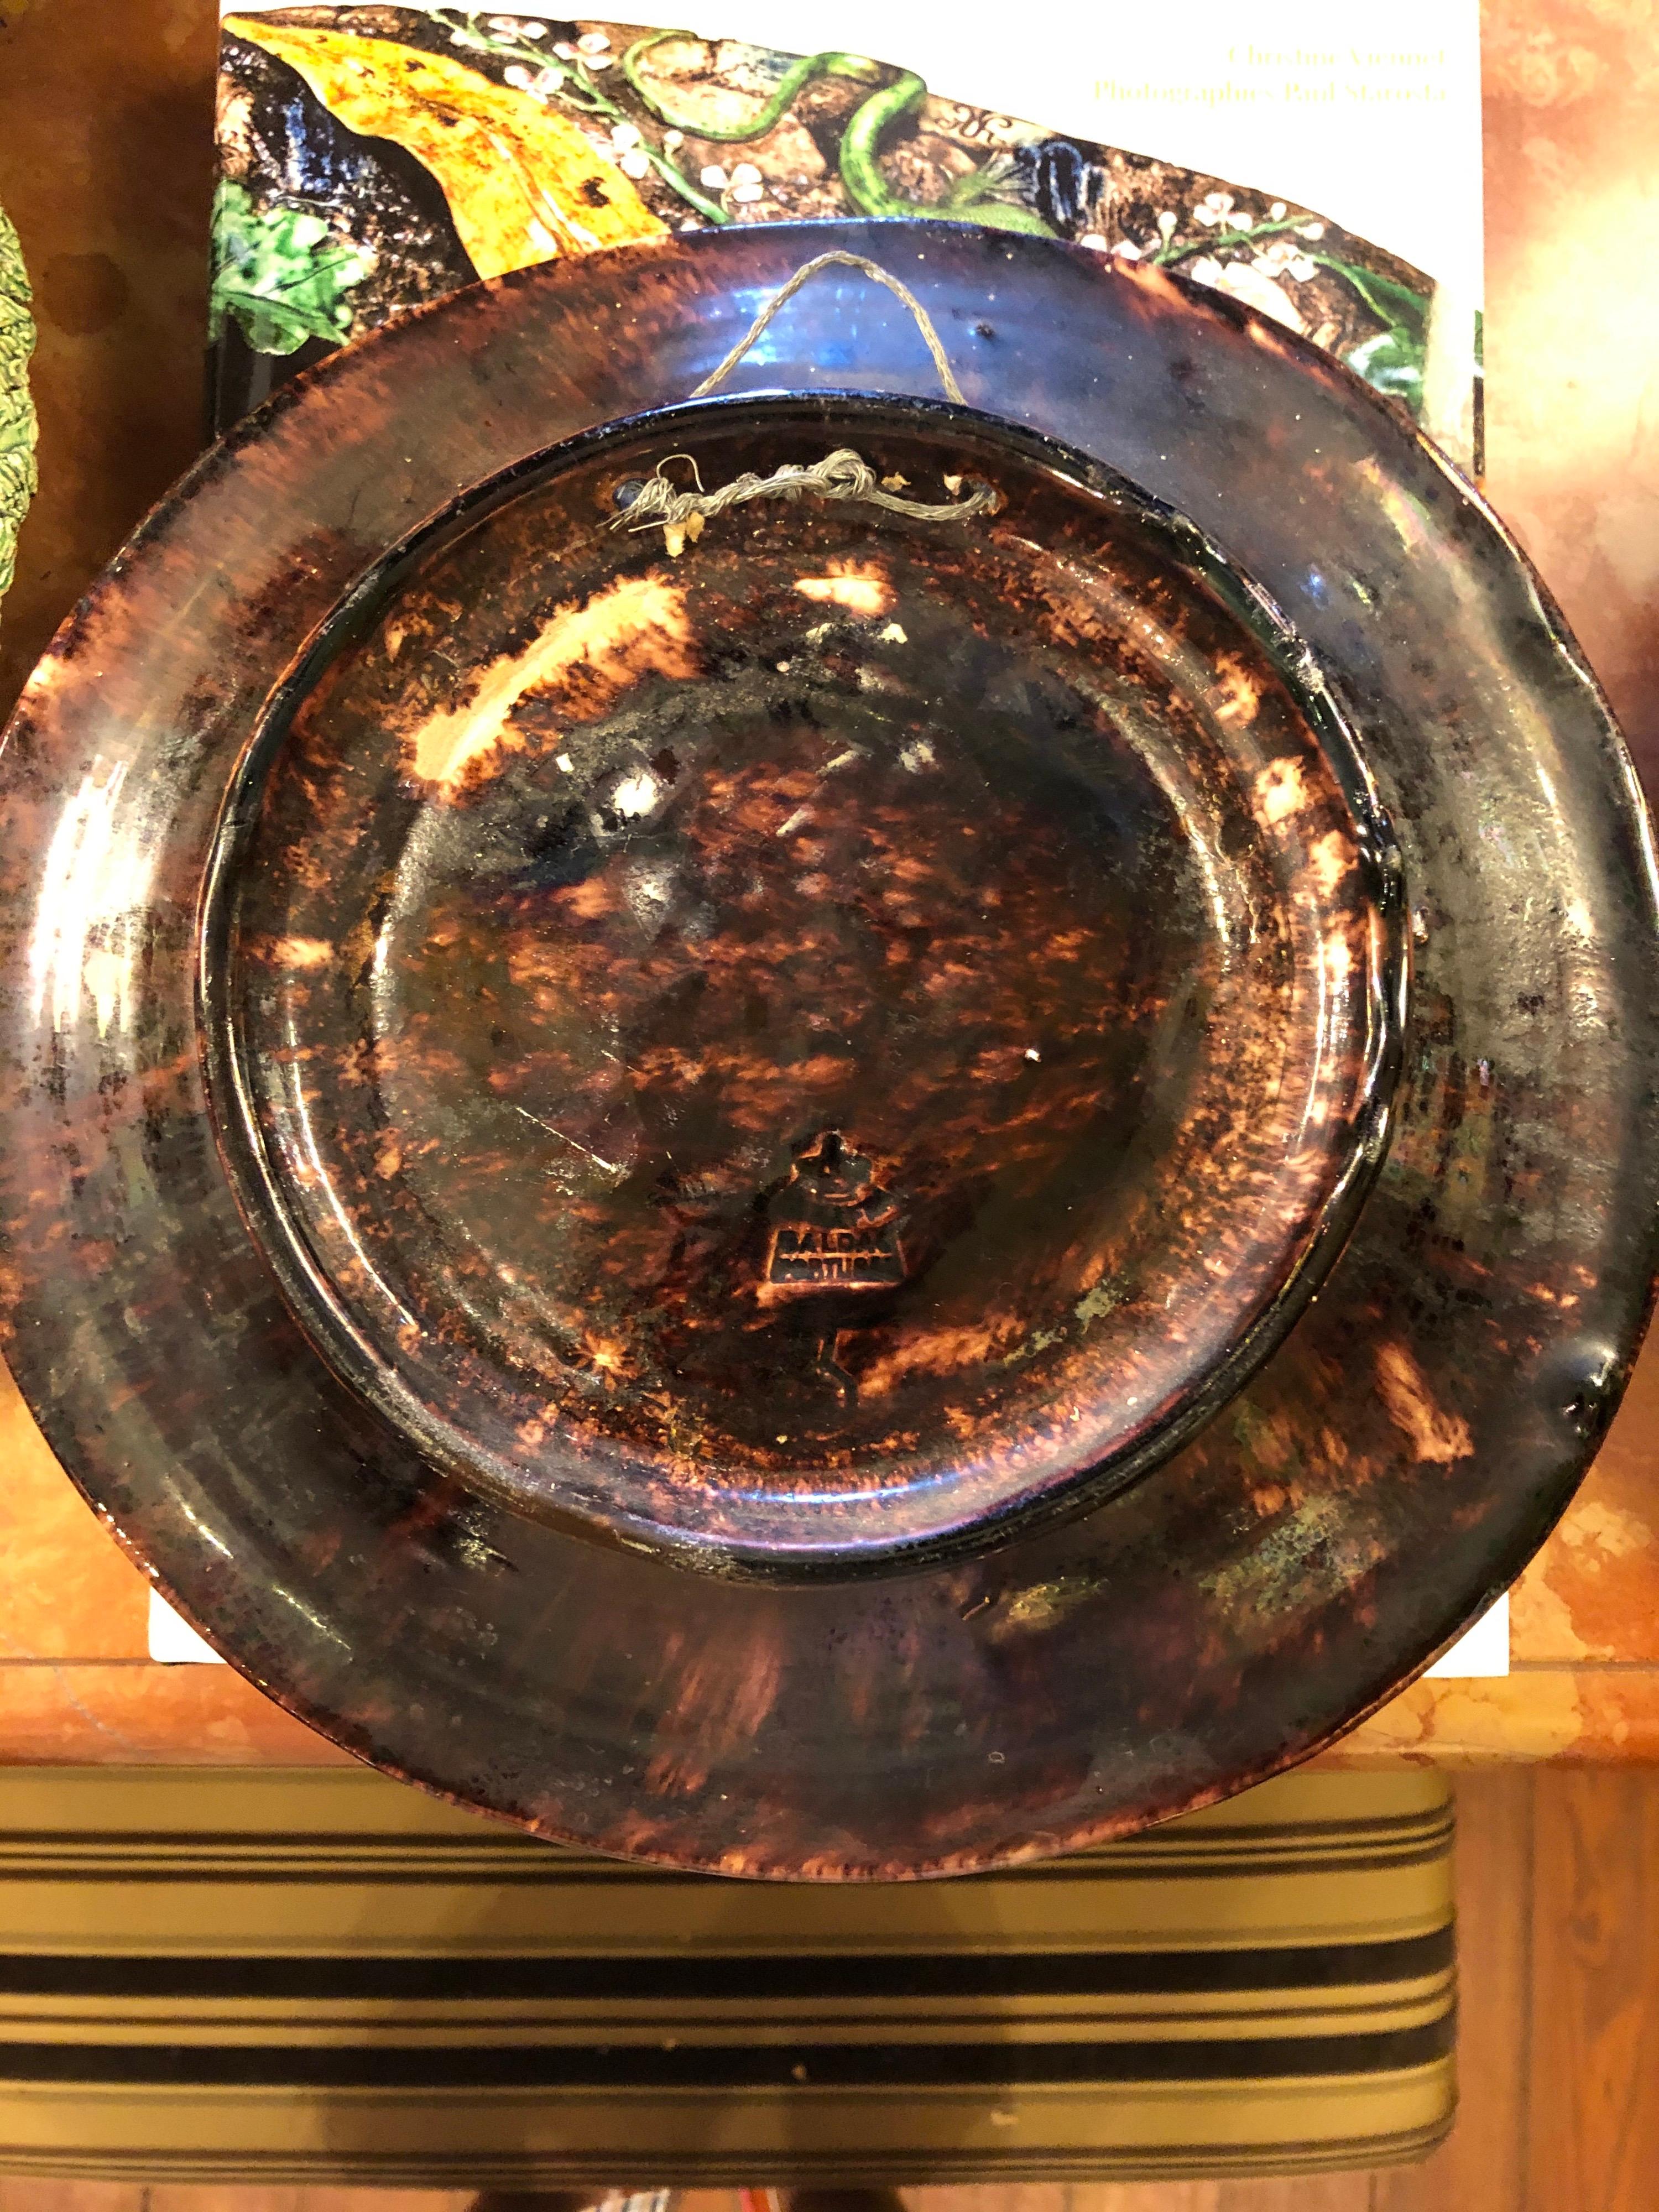 Portuguese palissy style plate with fishes.